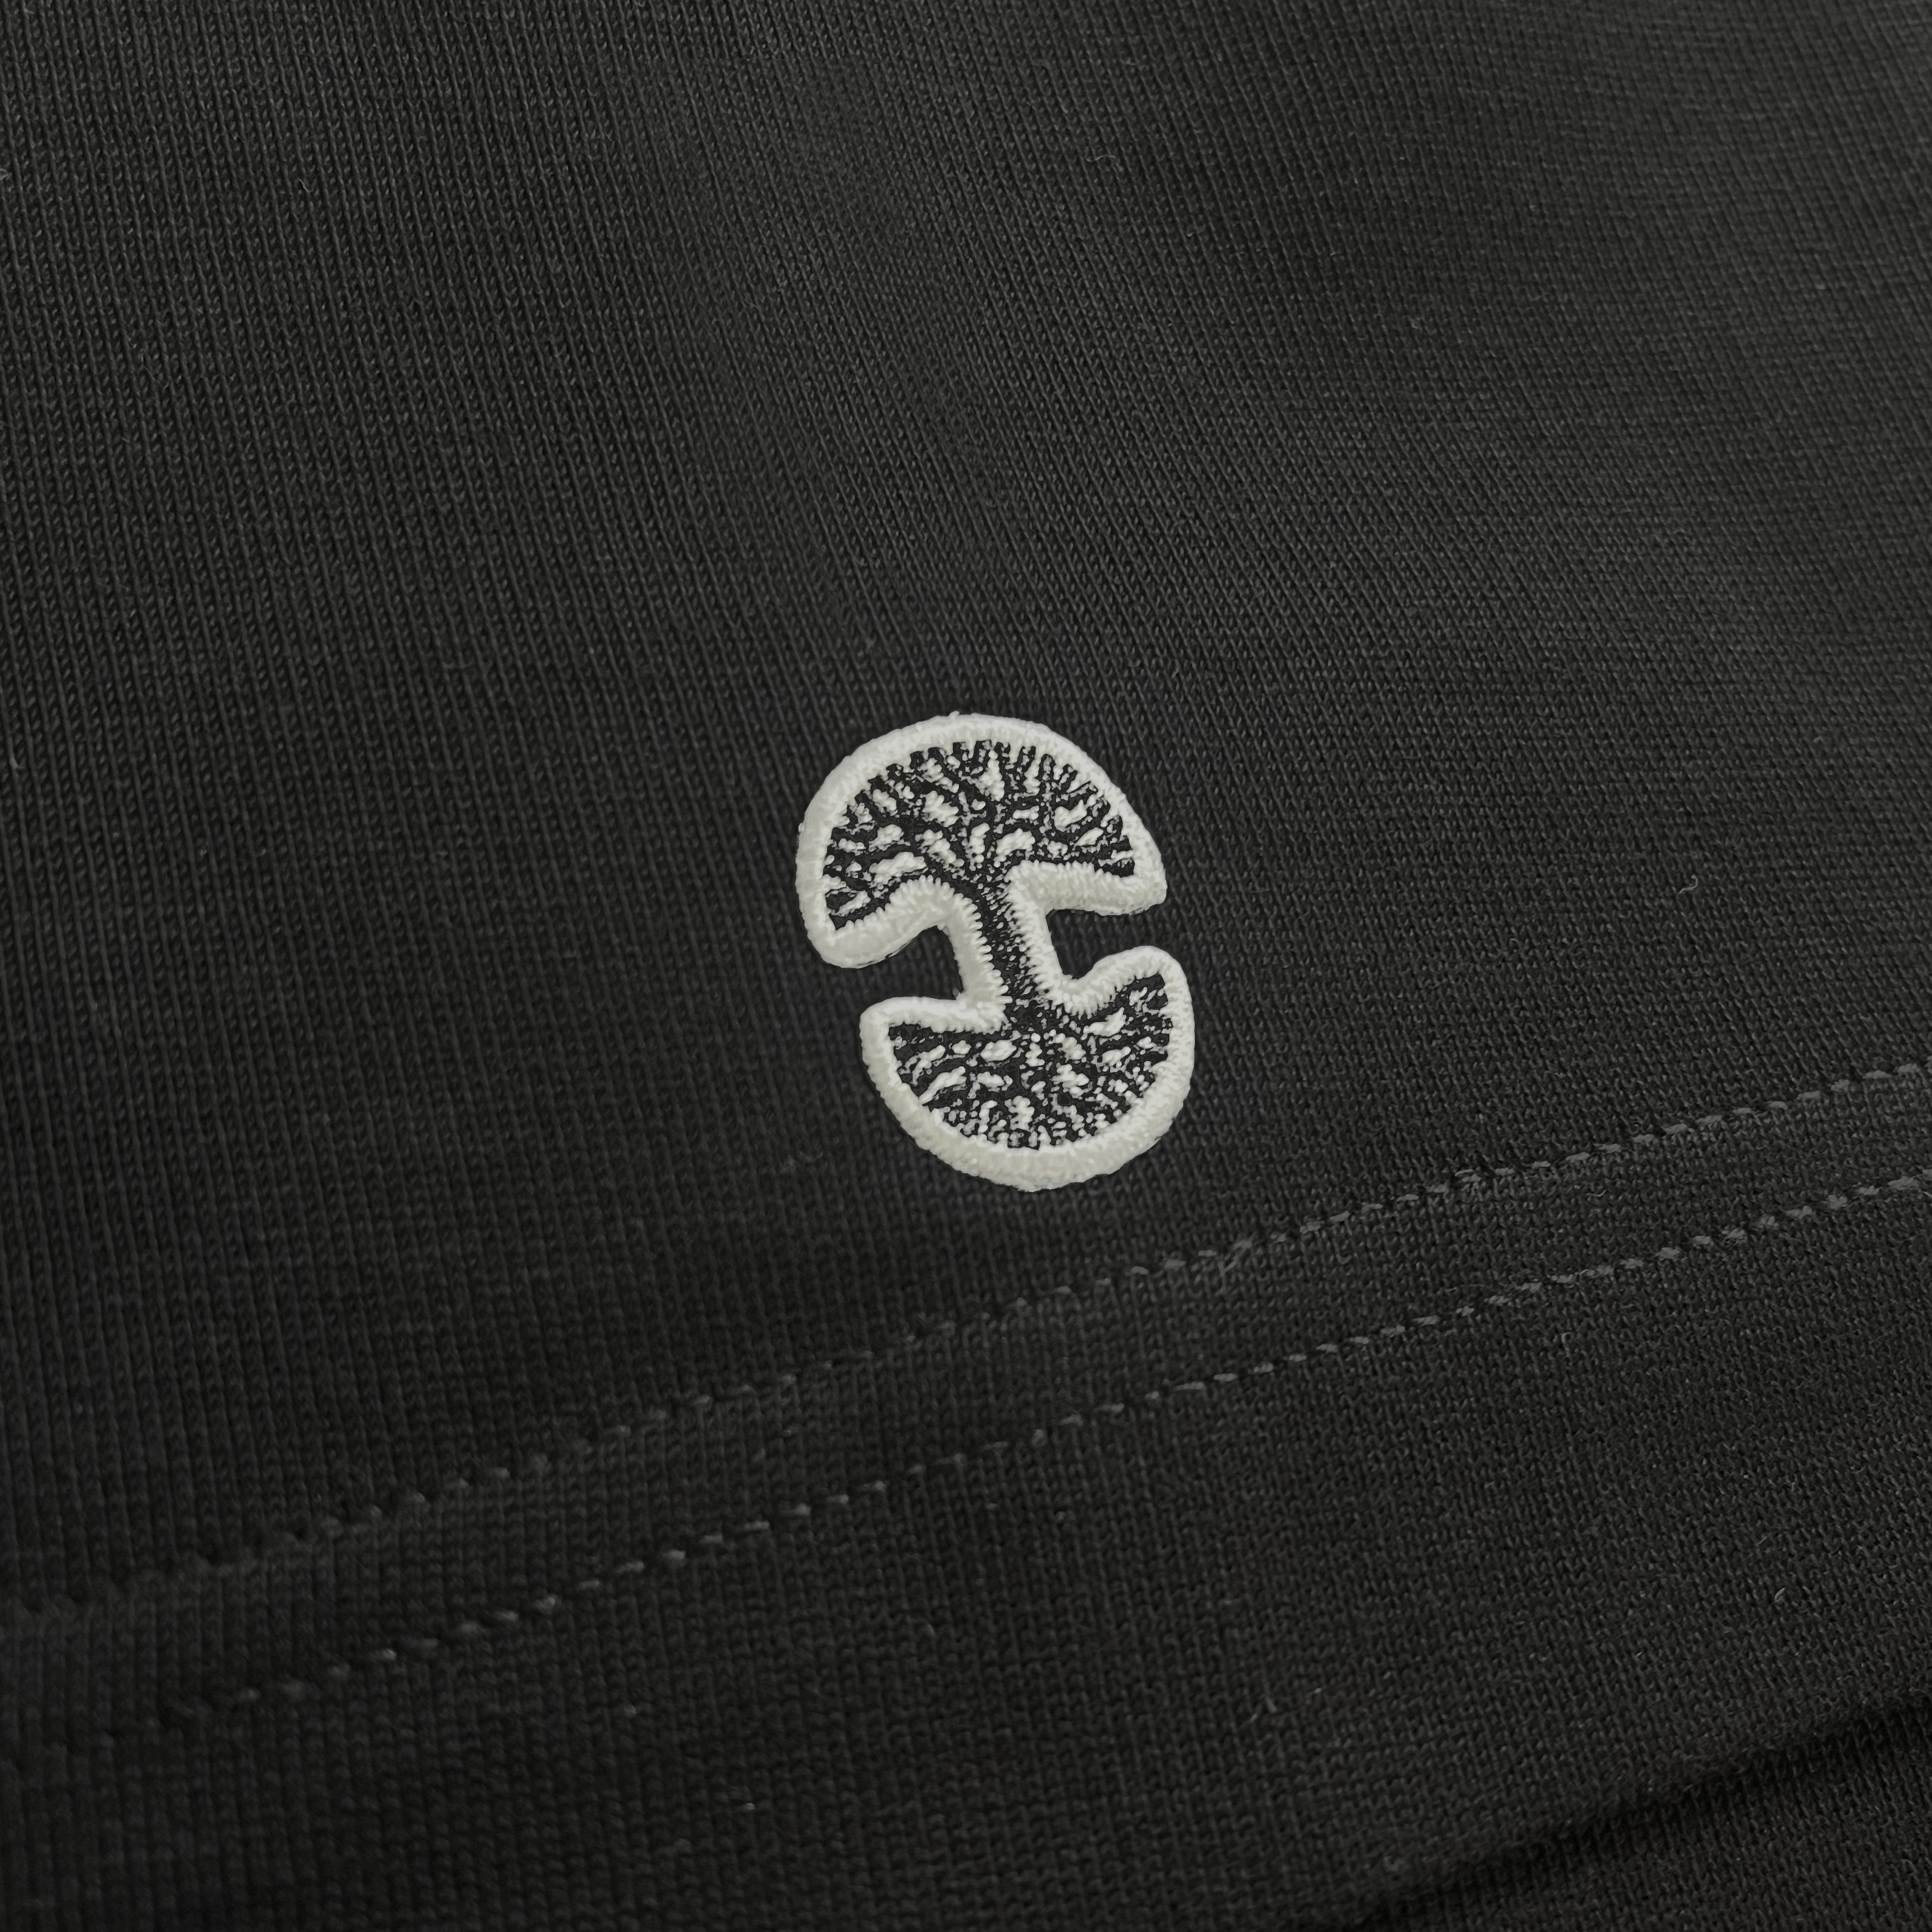 Detailed close up of Oaklandish tree logo on the sleeve of a black baseball jersey.